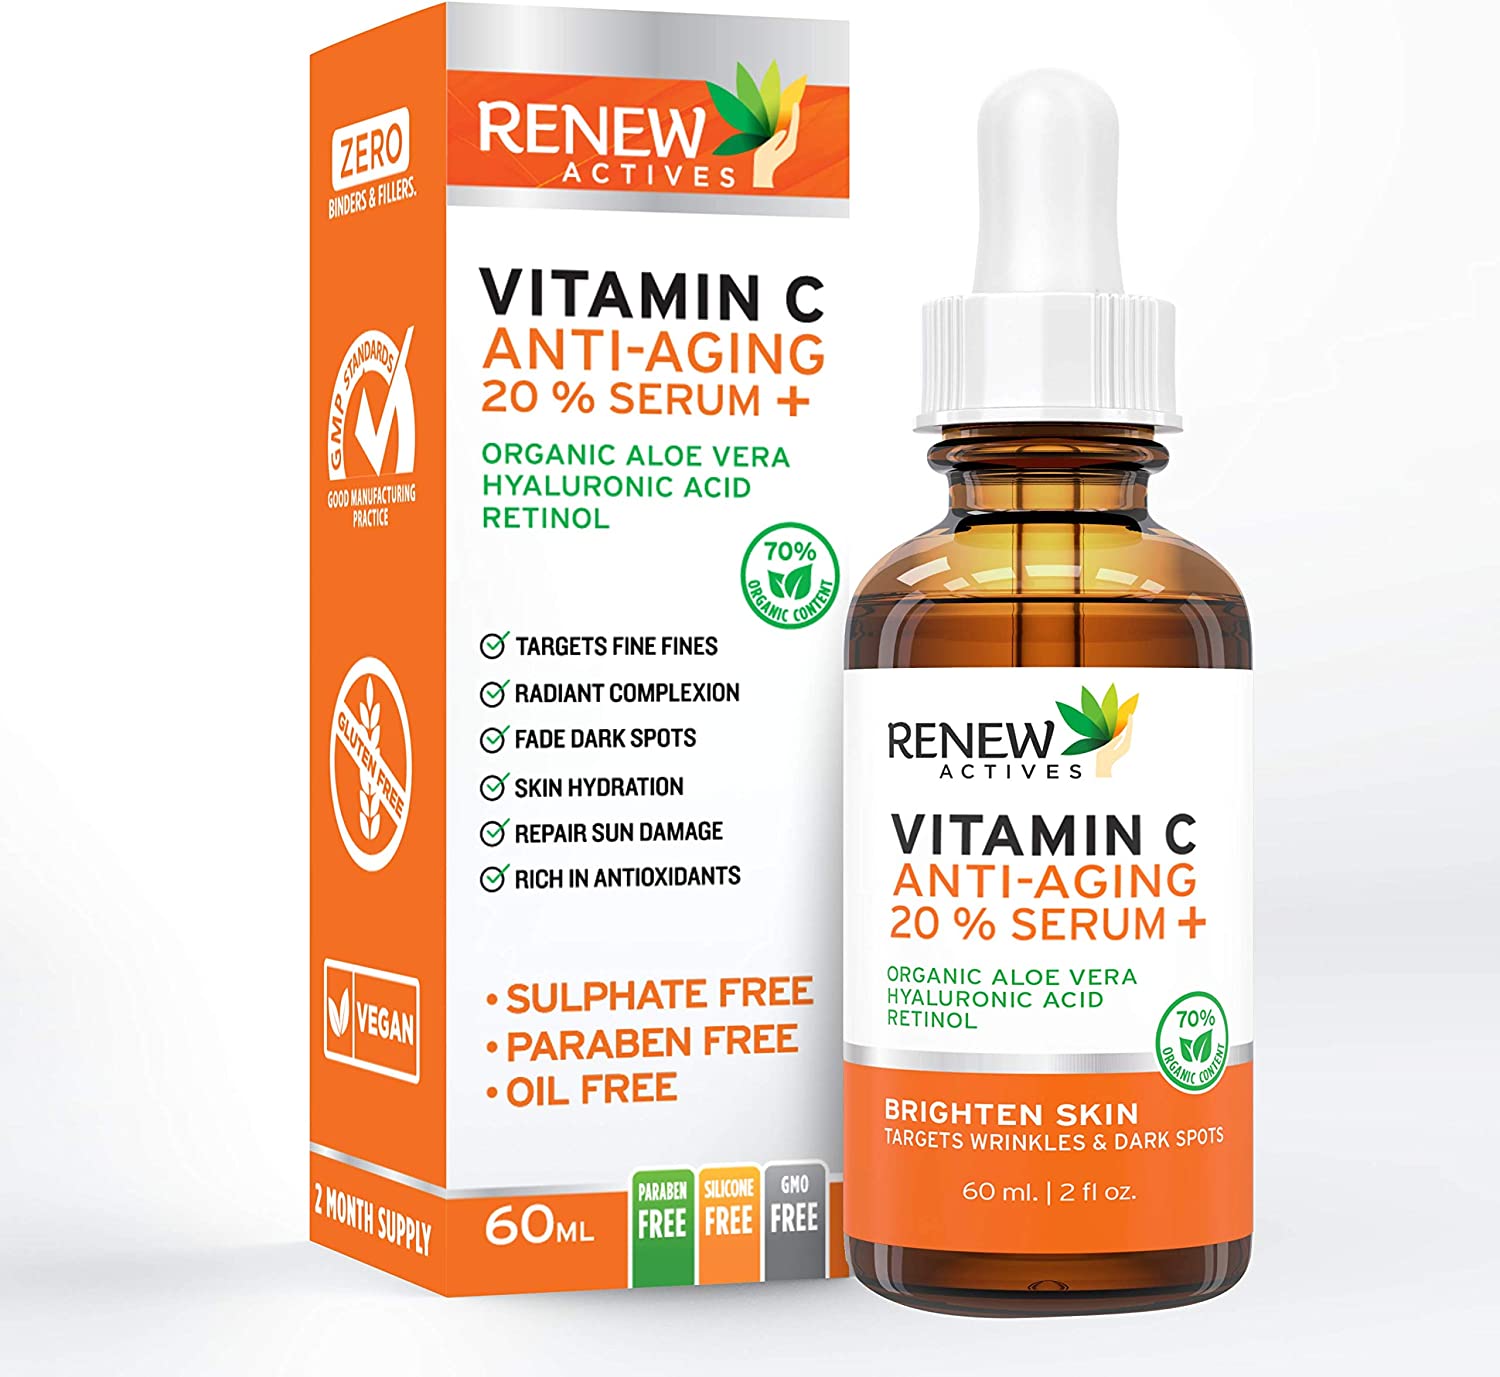 Renew Actives Vitamin C Serum – Anti-Aging Serum with Vitamin C, Hyaluronic Acid and Retinol – Face Serum for Wrinkles, Fine Lines and Dark Spots